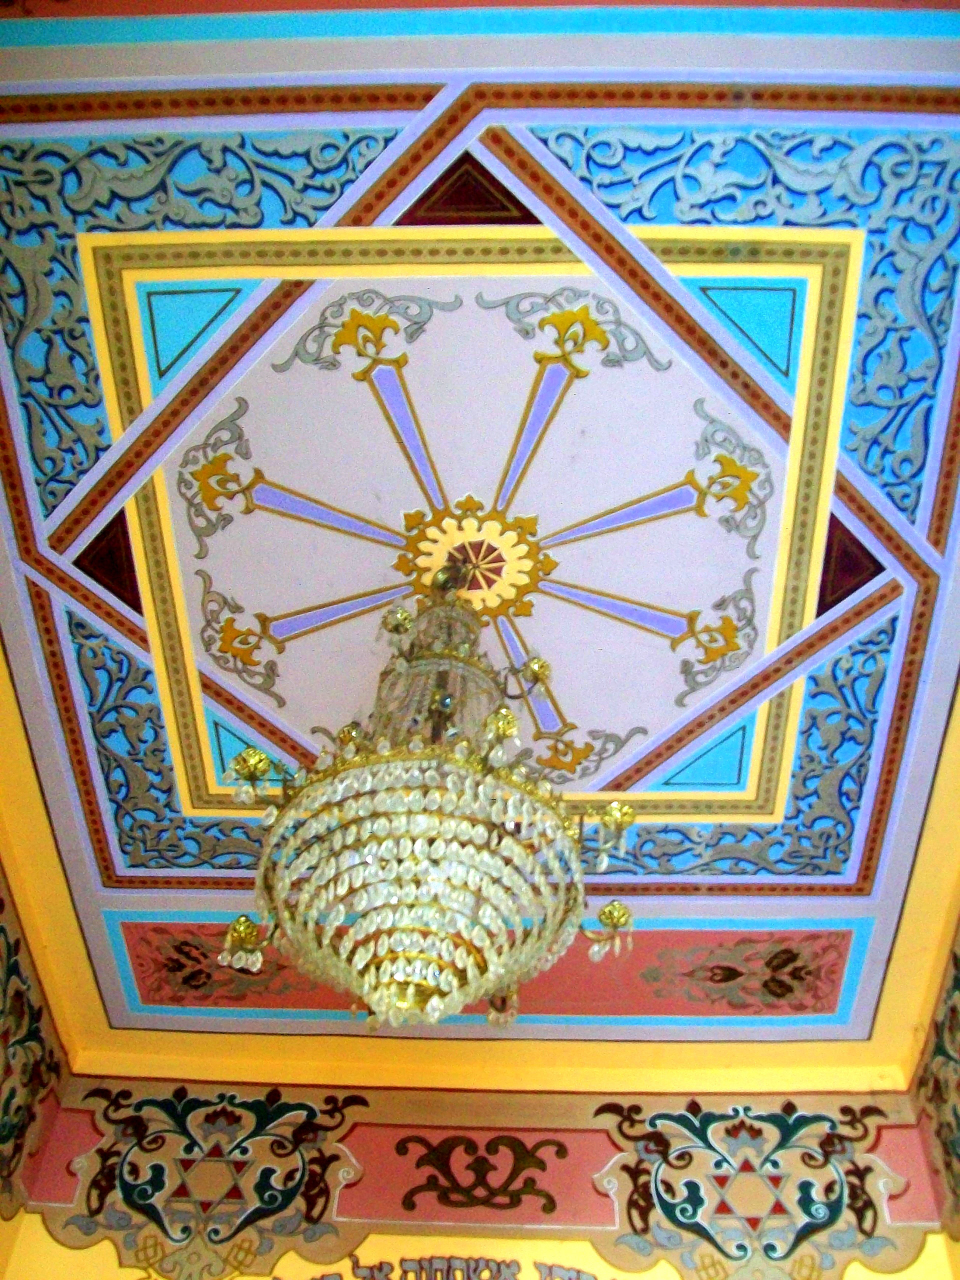 Ceiling from the Great Tblisi Synagogue - Tblisi, Georgia